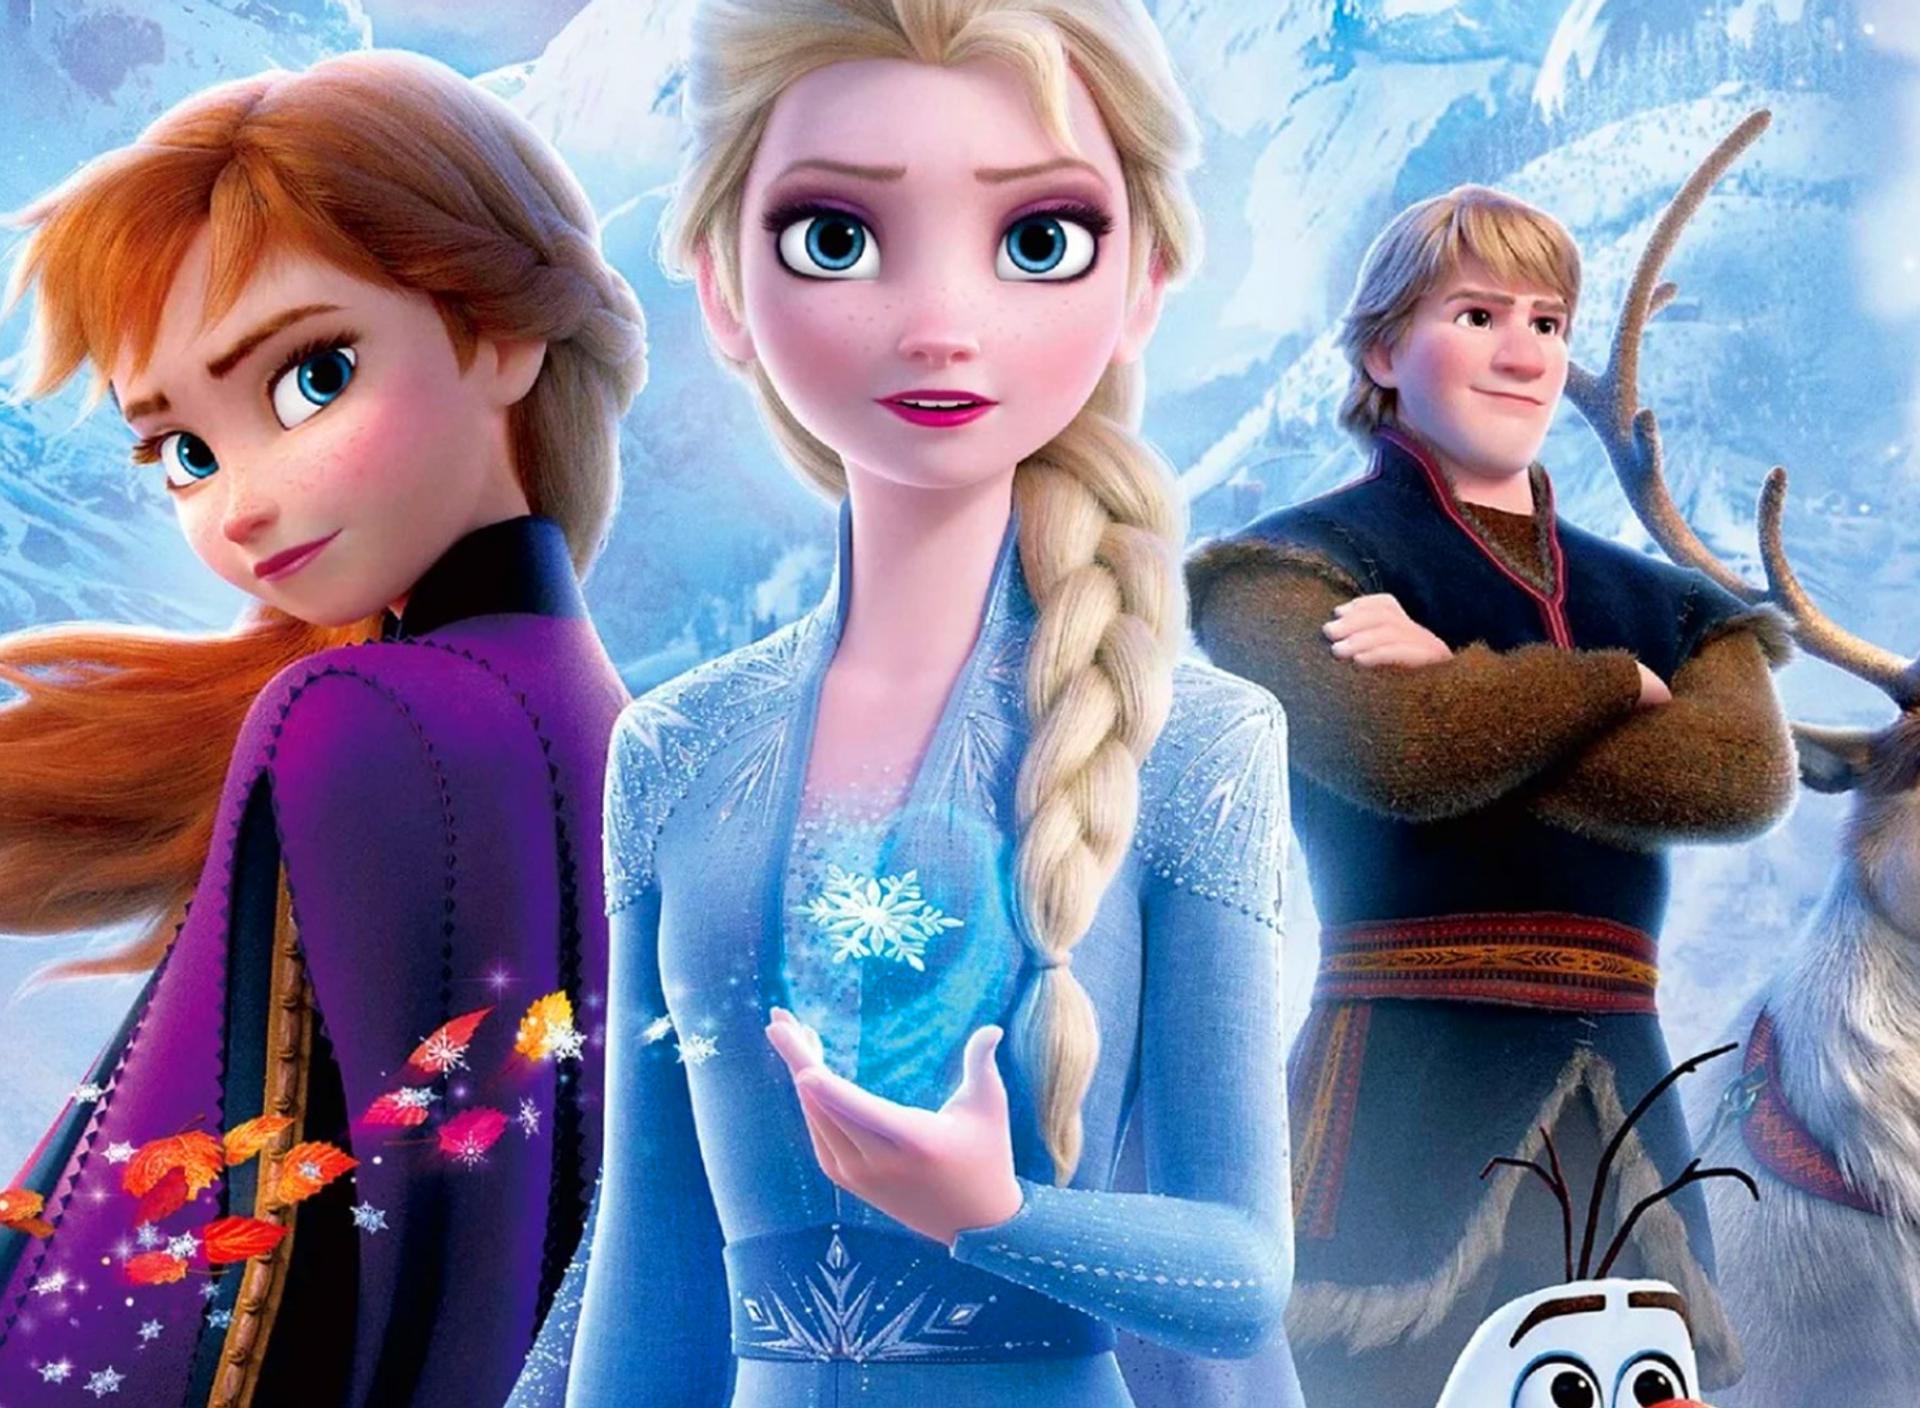 Download Discovering magic power for Anna - Frozen 2 kids movie 1280x800 Ta...